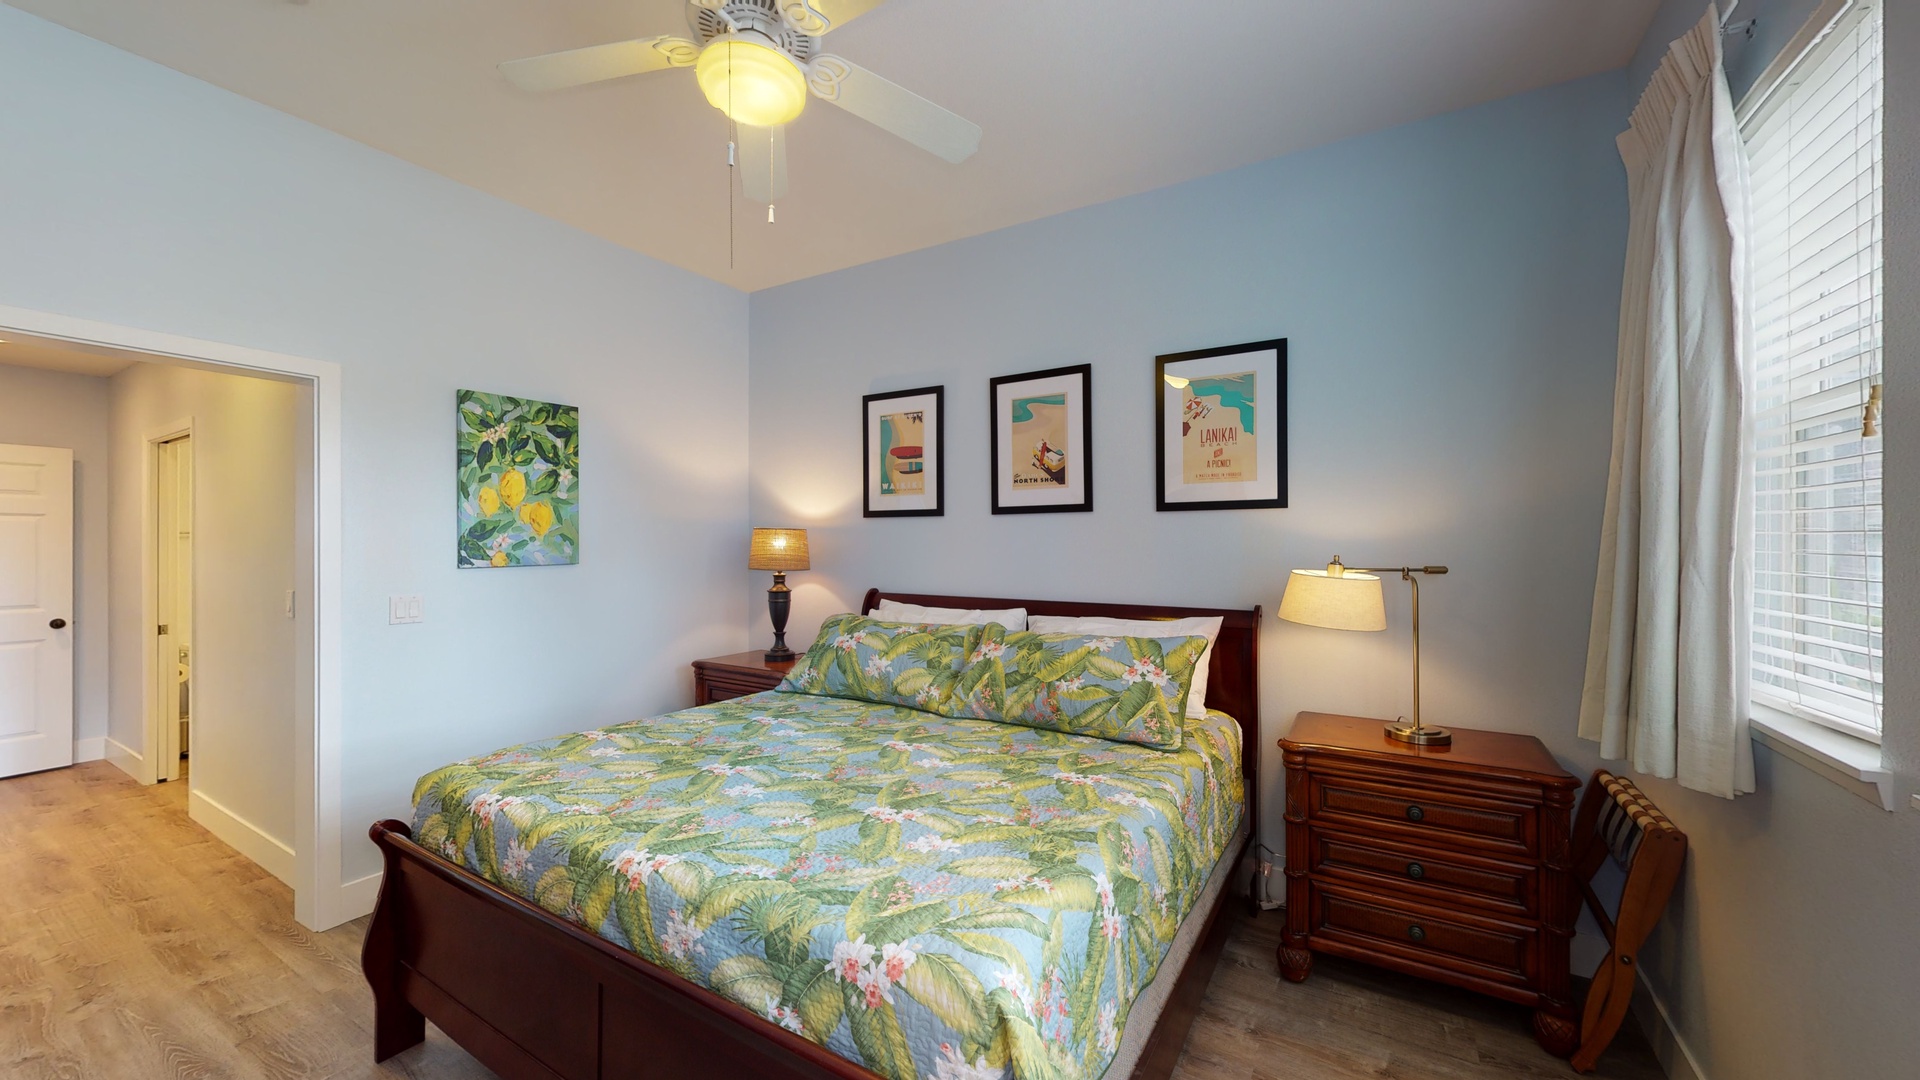 Kapolei Vacation Rentals, Coconut Plantation 1214-2 Aloha Lagoons - The comfortable primary bedroom has scenic views to wake up to.